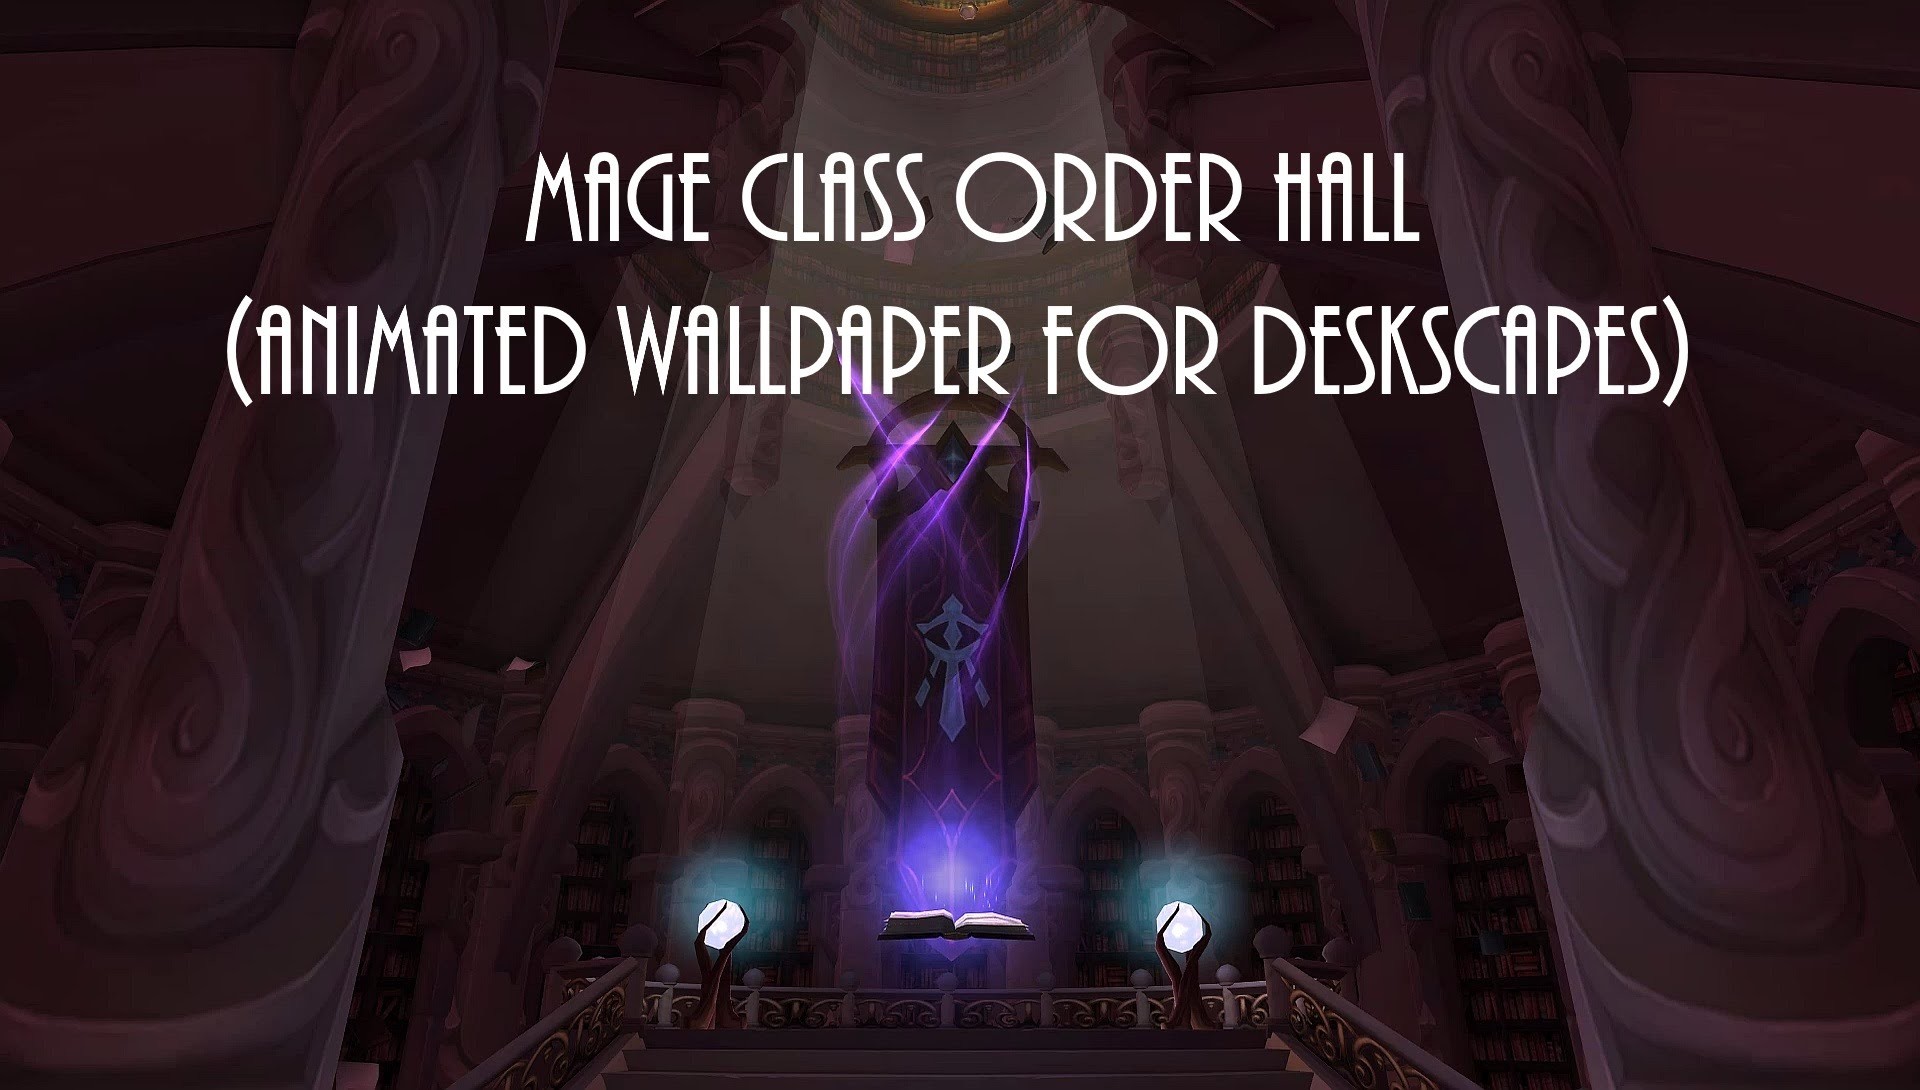 1920x1090 World of Warcraft Legion Mage Hall (animated wallpaper for Deskscapes)